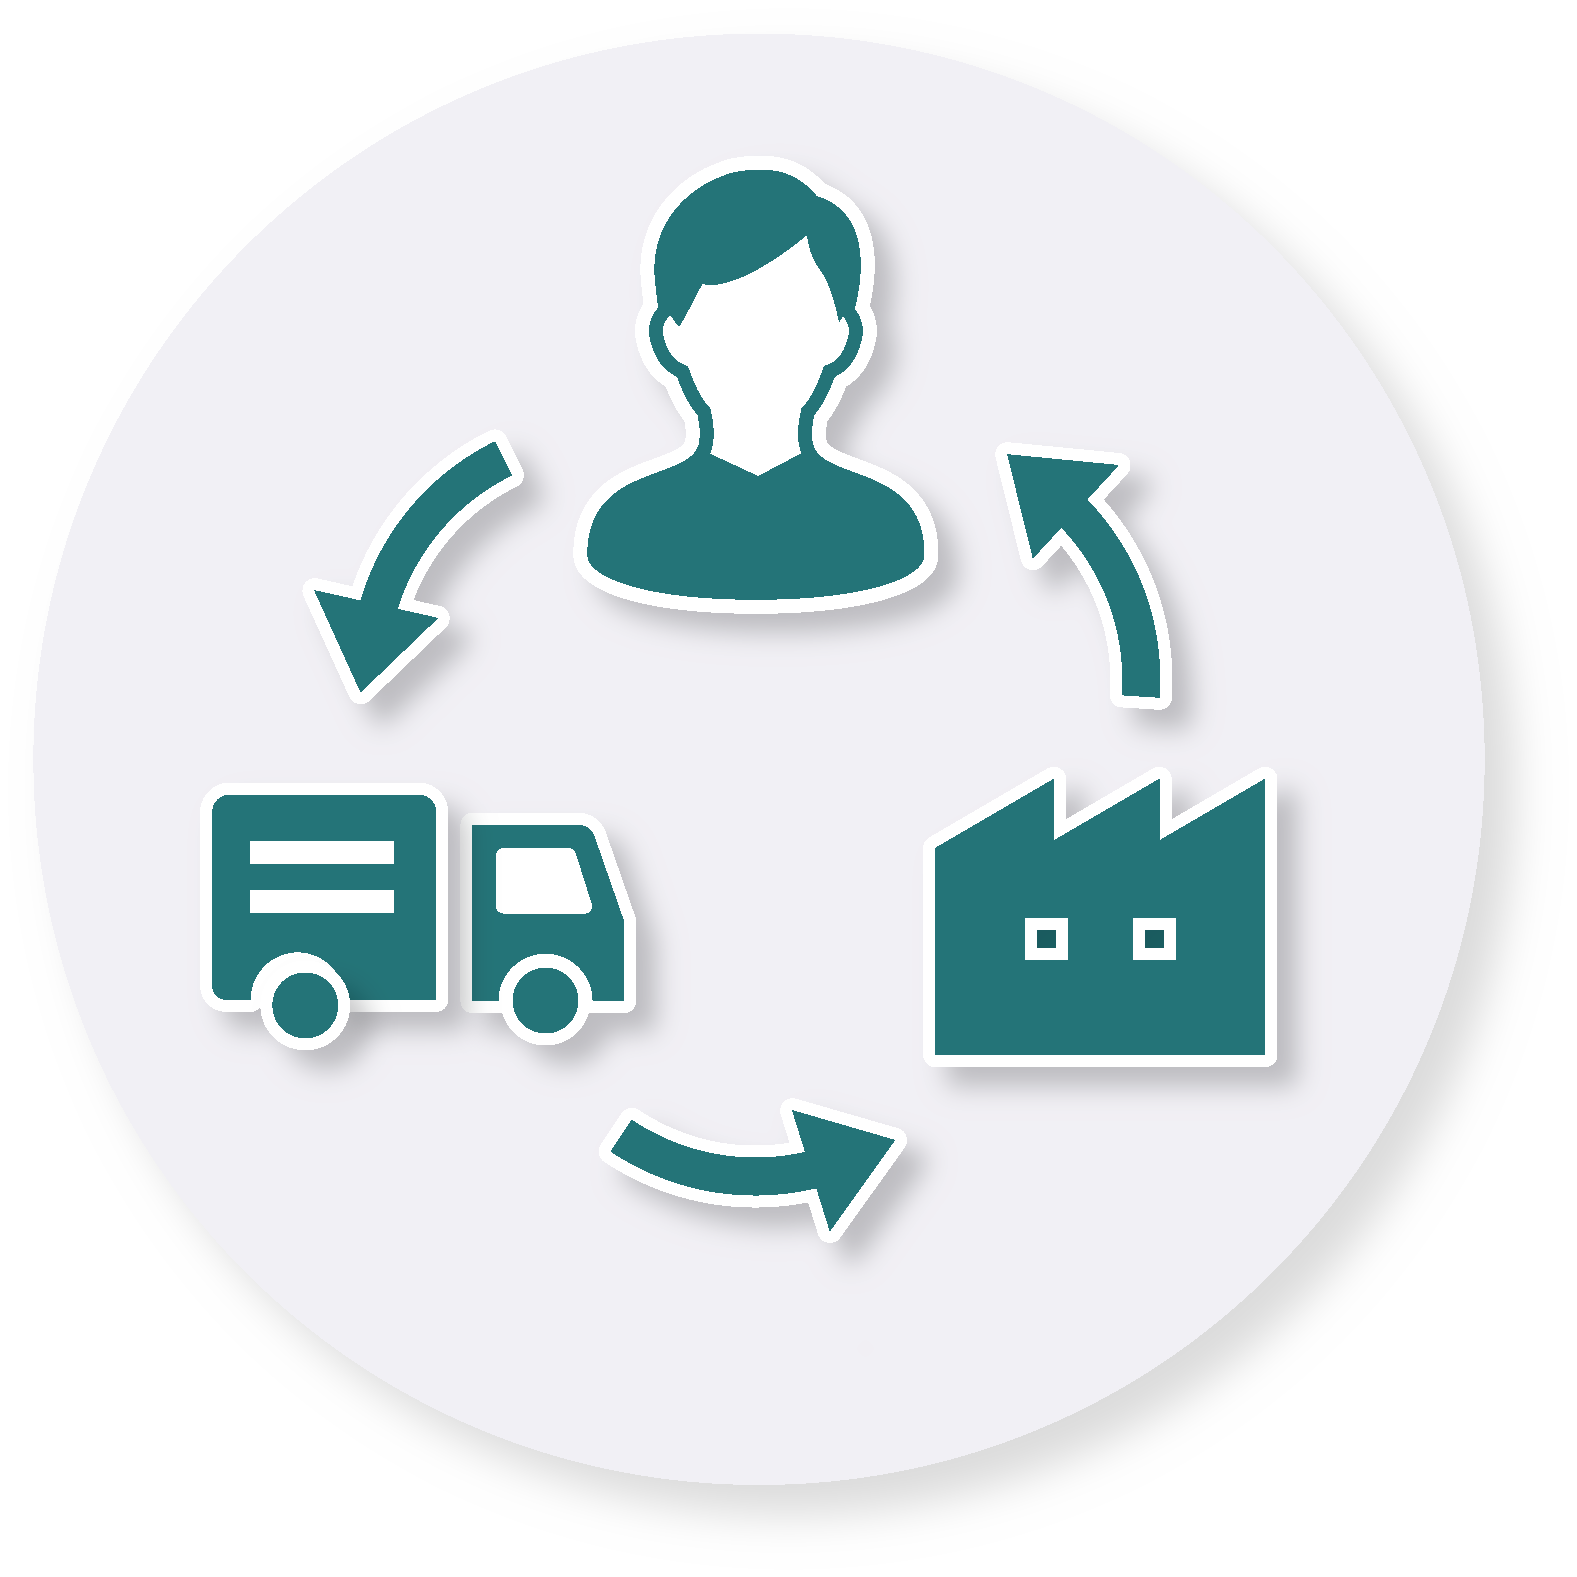 ARKRAY's Materiality - Supply chain